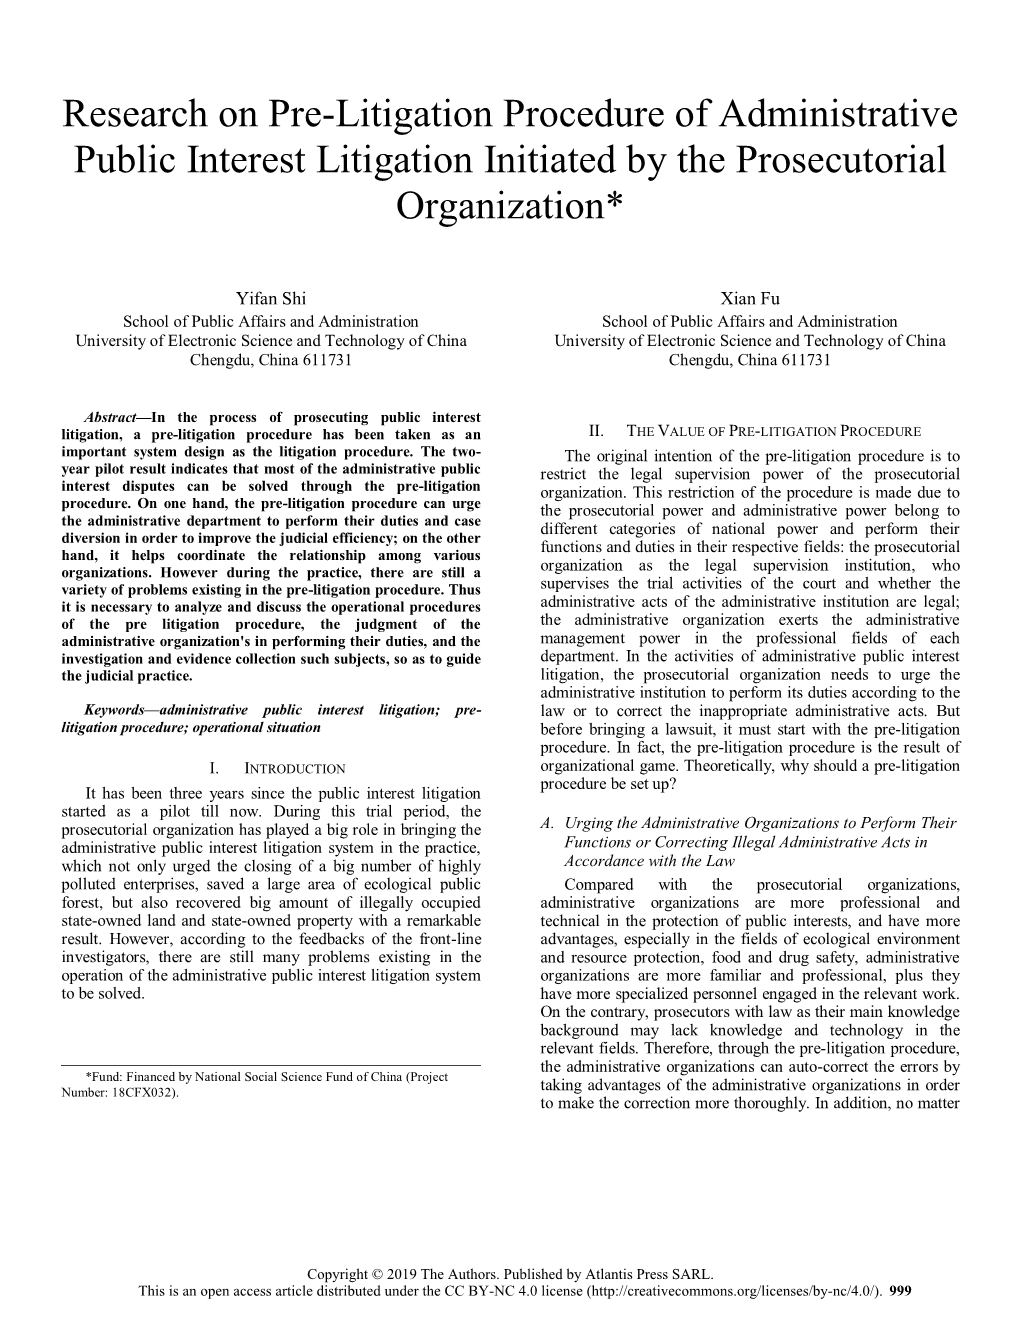 Research on Pre-Litigation Procedure of Administrative Public Interest Litigation Initiated by the Prosecutorial Organization*